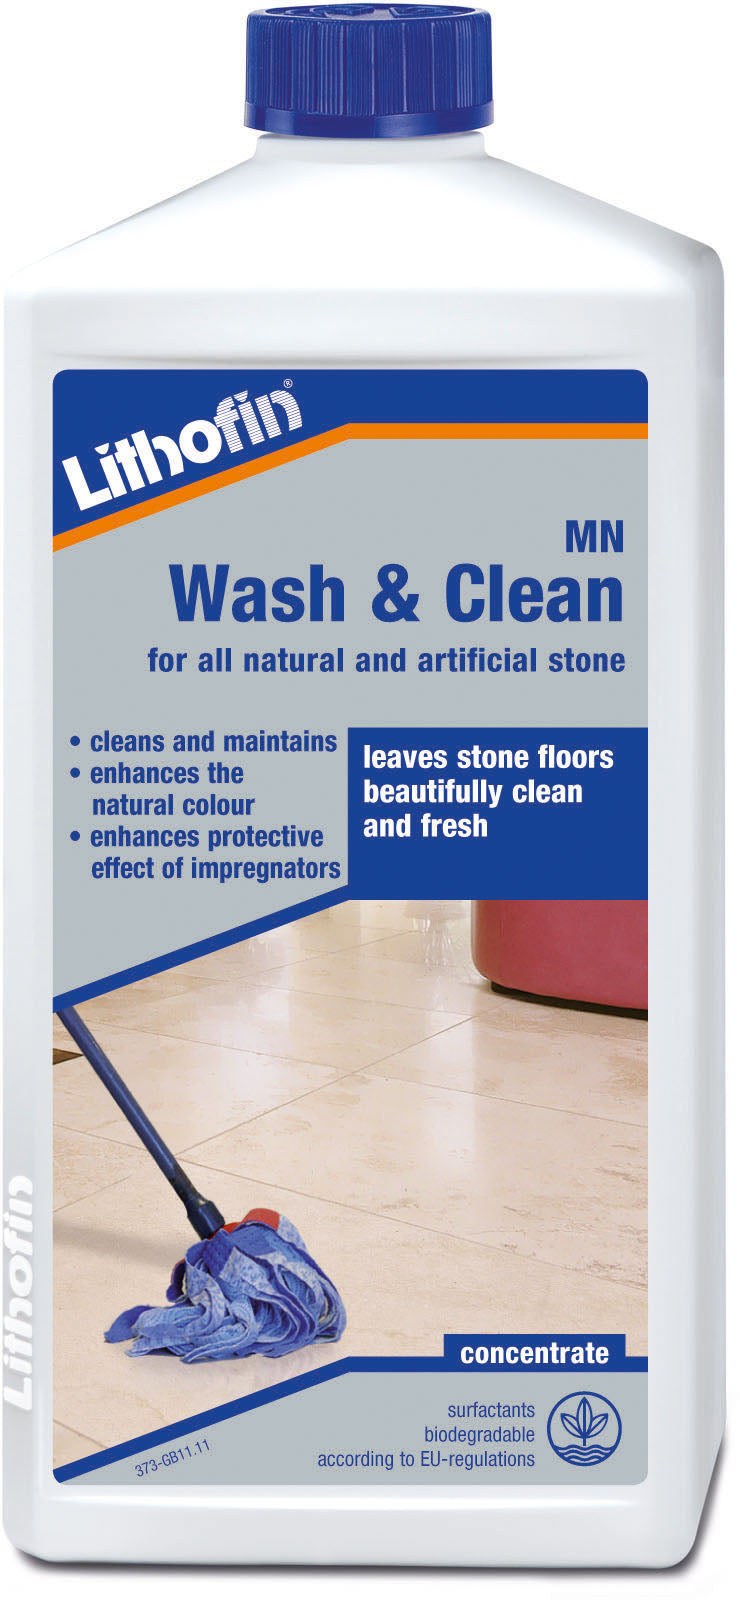 Lithofin wash & clean for all natural and artificial stone 